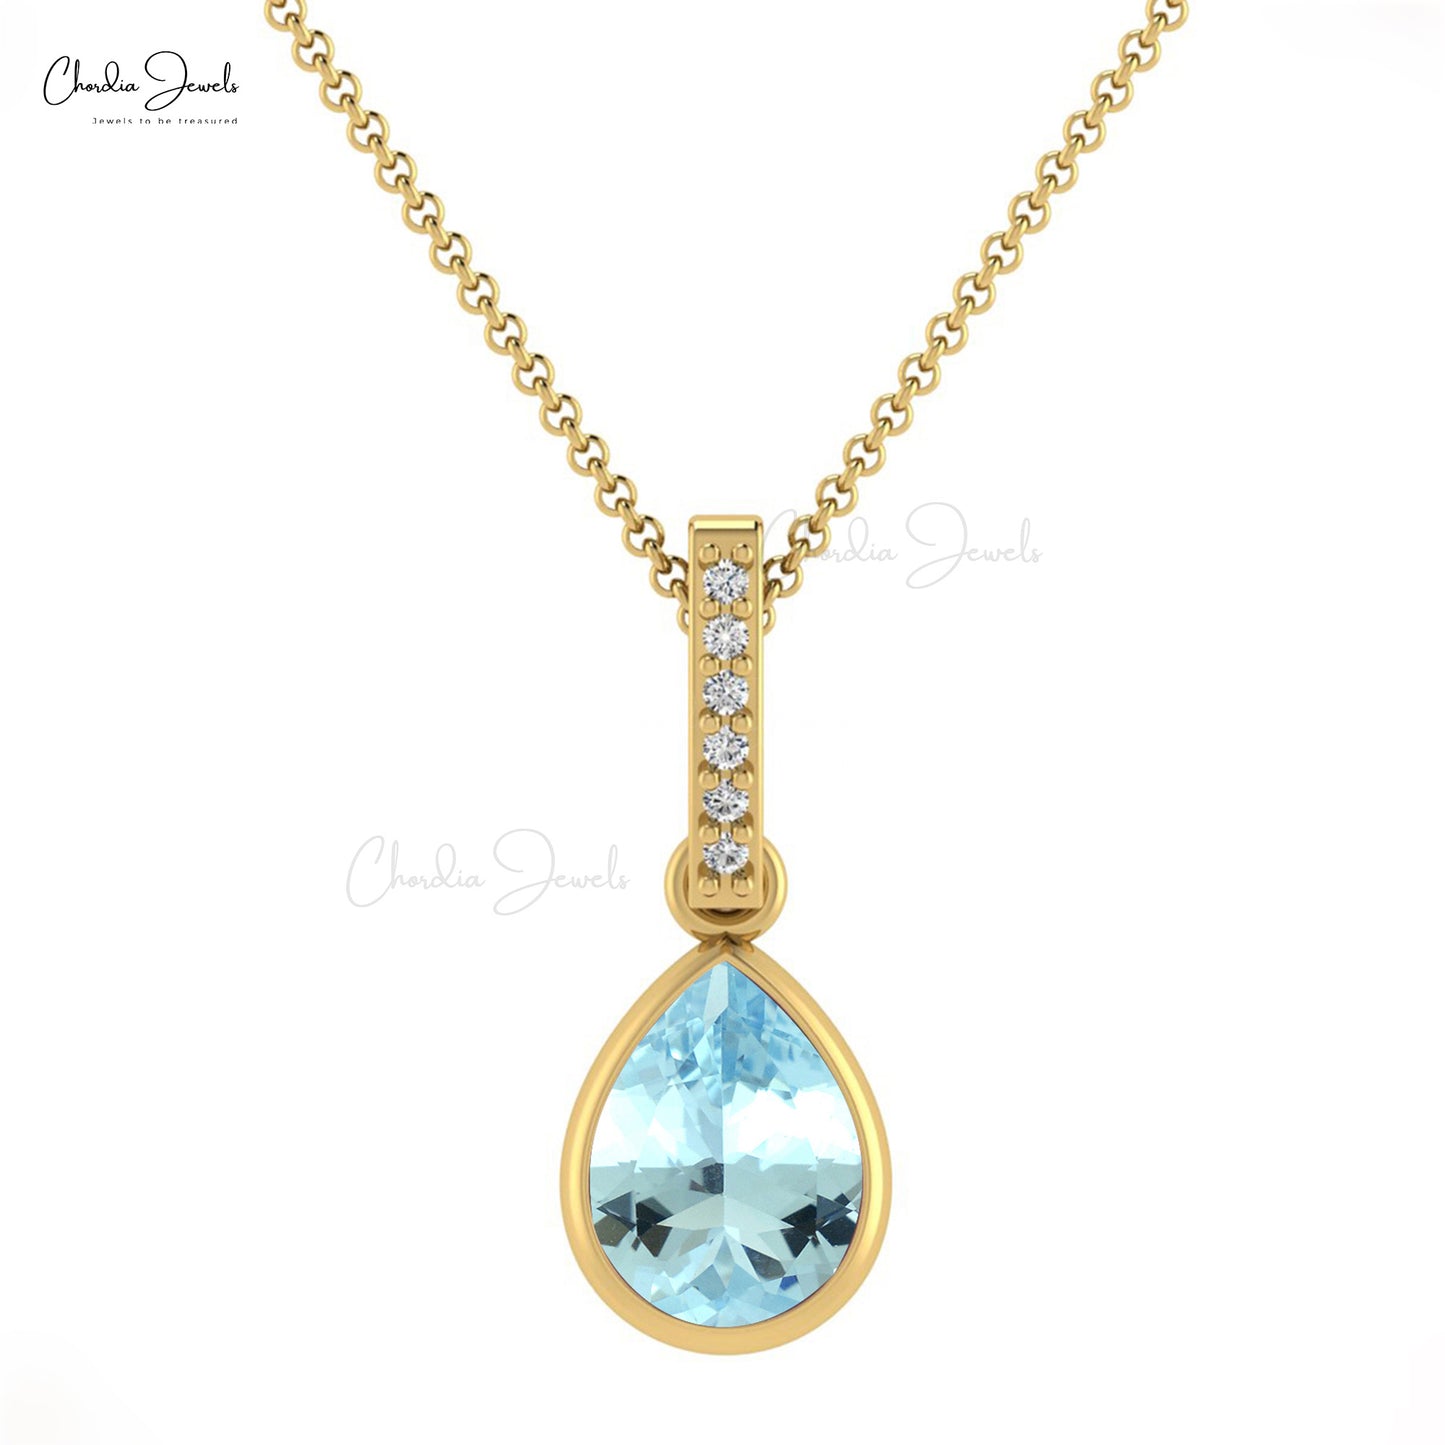 New Design Water Drop 14k Real Gold Pendant Necklace Authentic Aquamarine and White Diamond Pendant Minimalist Jewelry For Wedding Gift